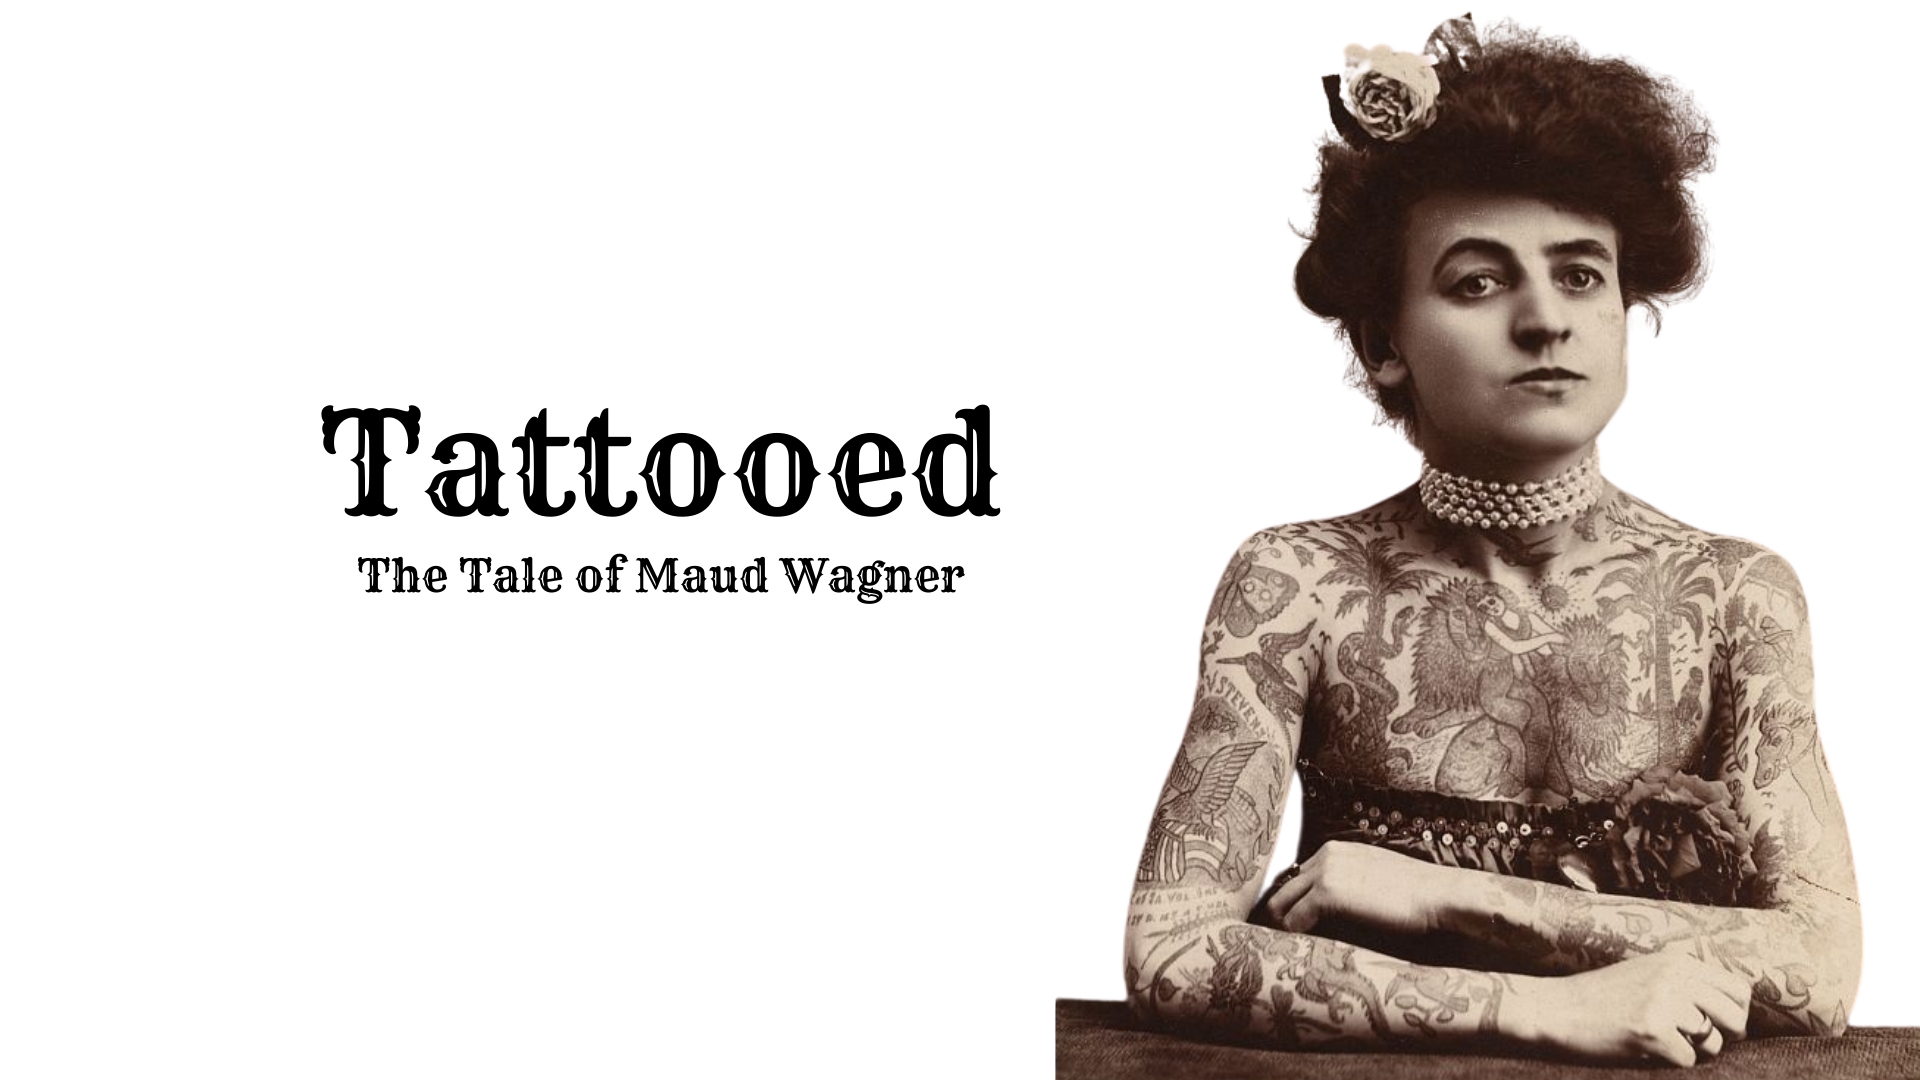 Text reads Tattooed The Tale of Maud Wagner. Image is of a woman in a sequined strapless dress and dark hair upswept with a flower. The woman's skin is covered in tattoos of plants and people.